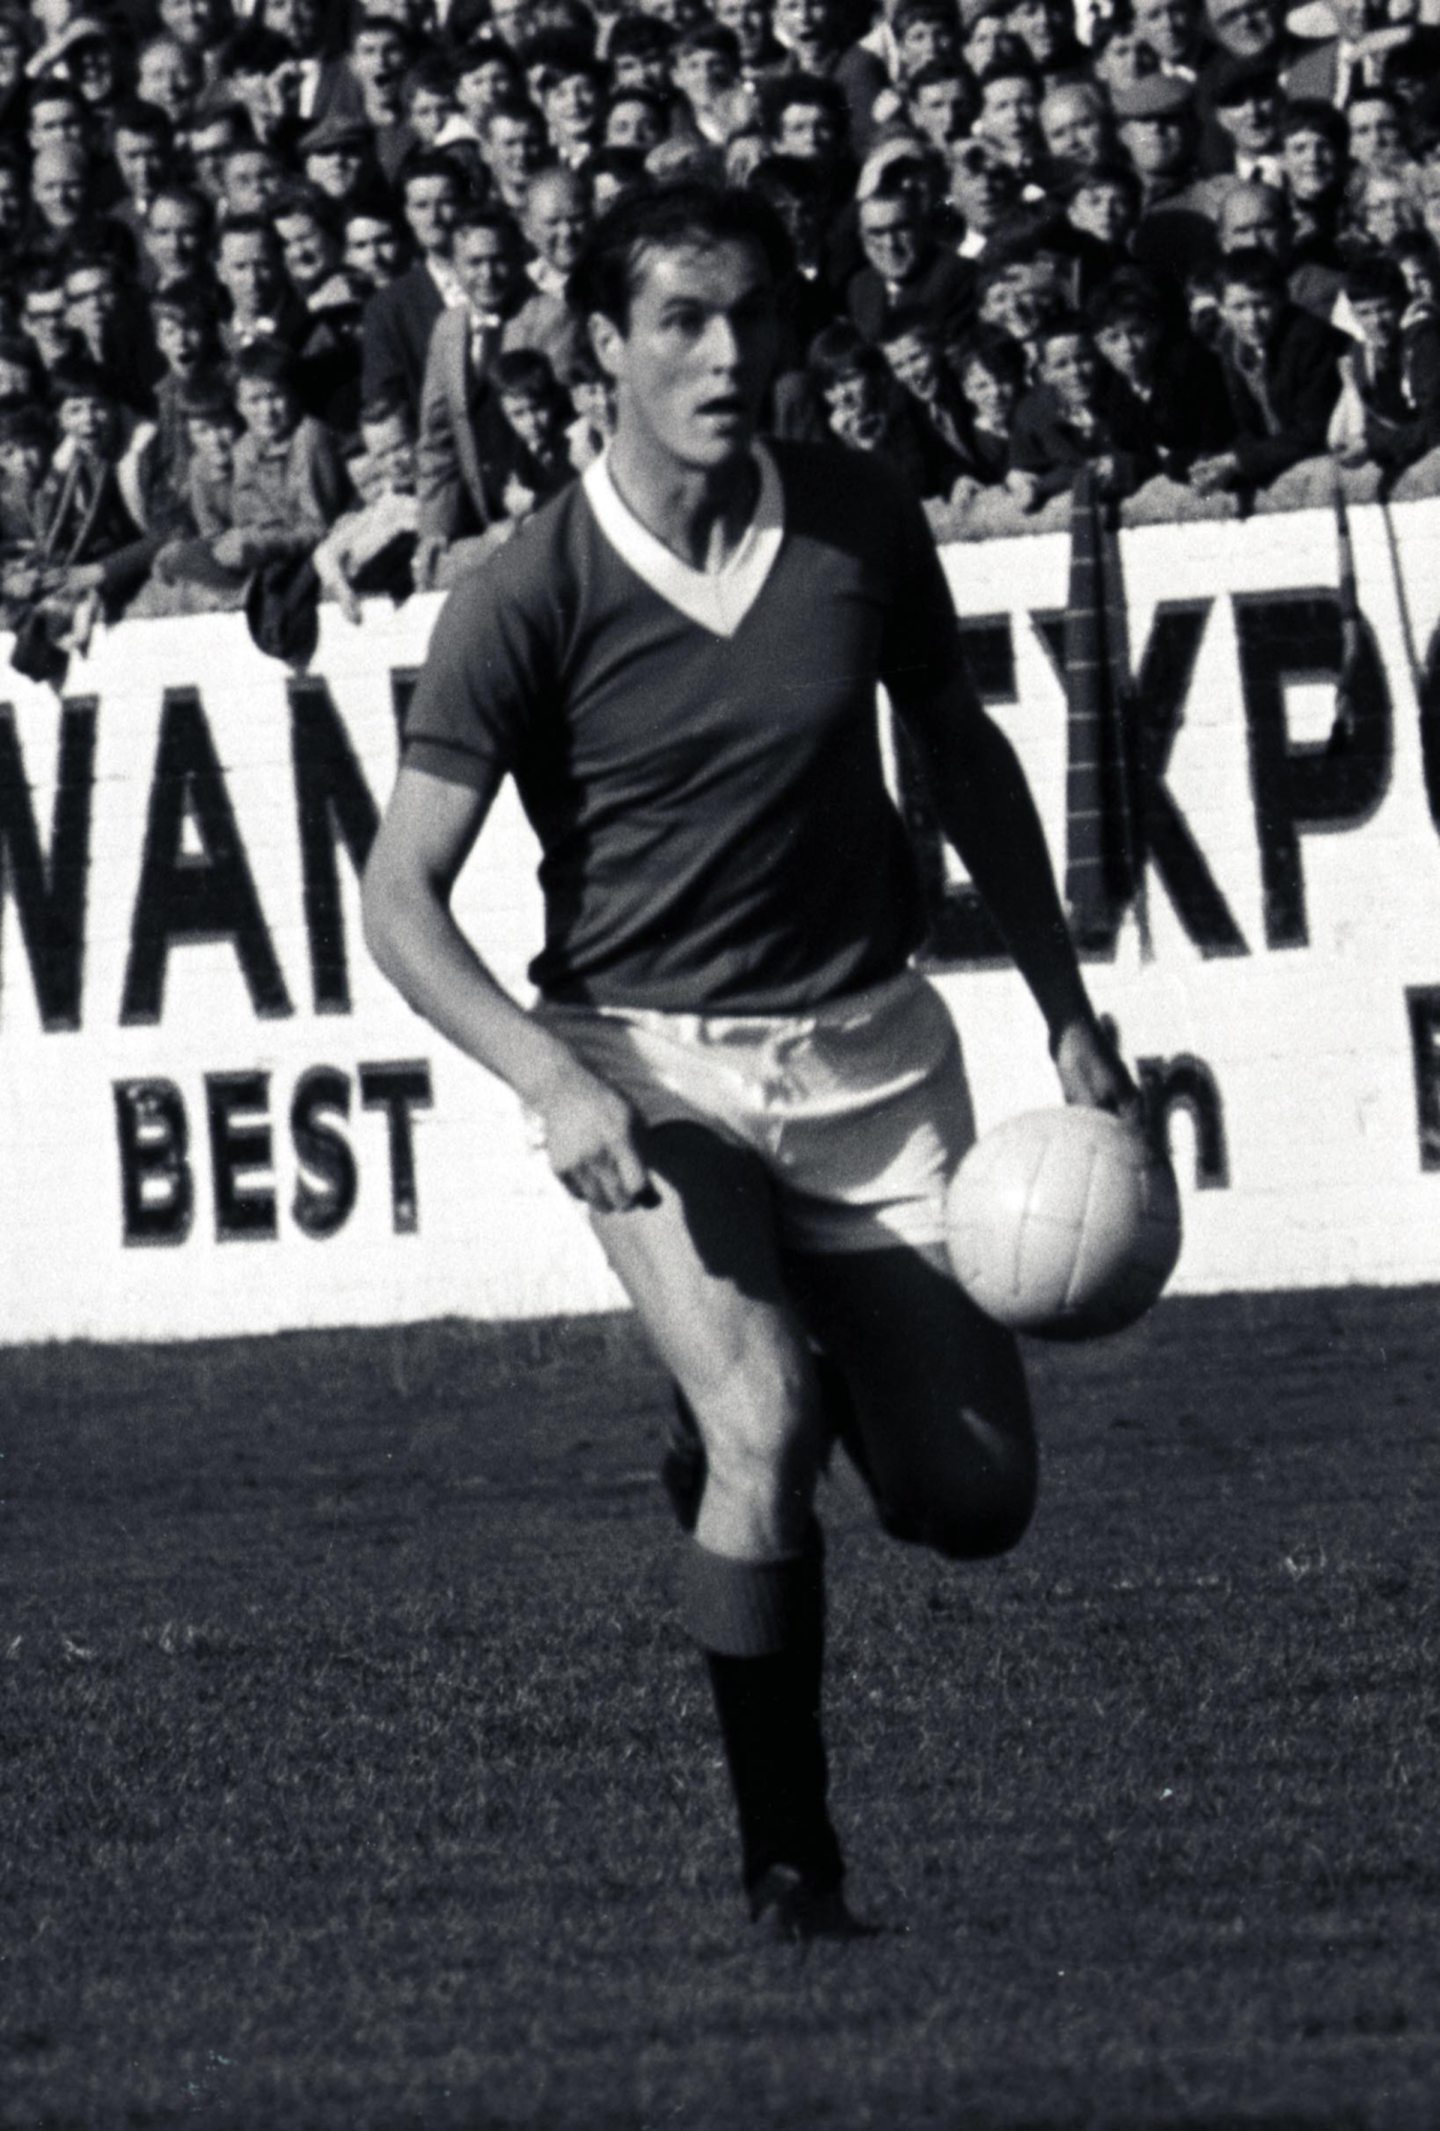 George McLean in action for Rangers during 1961-62 season.